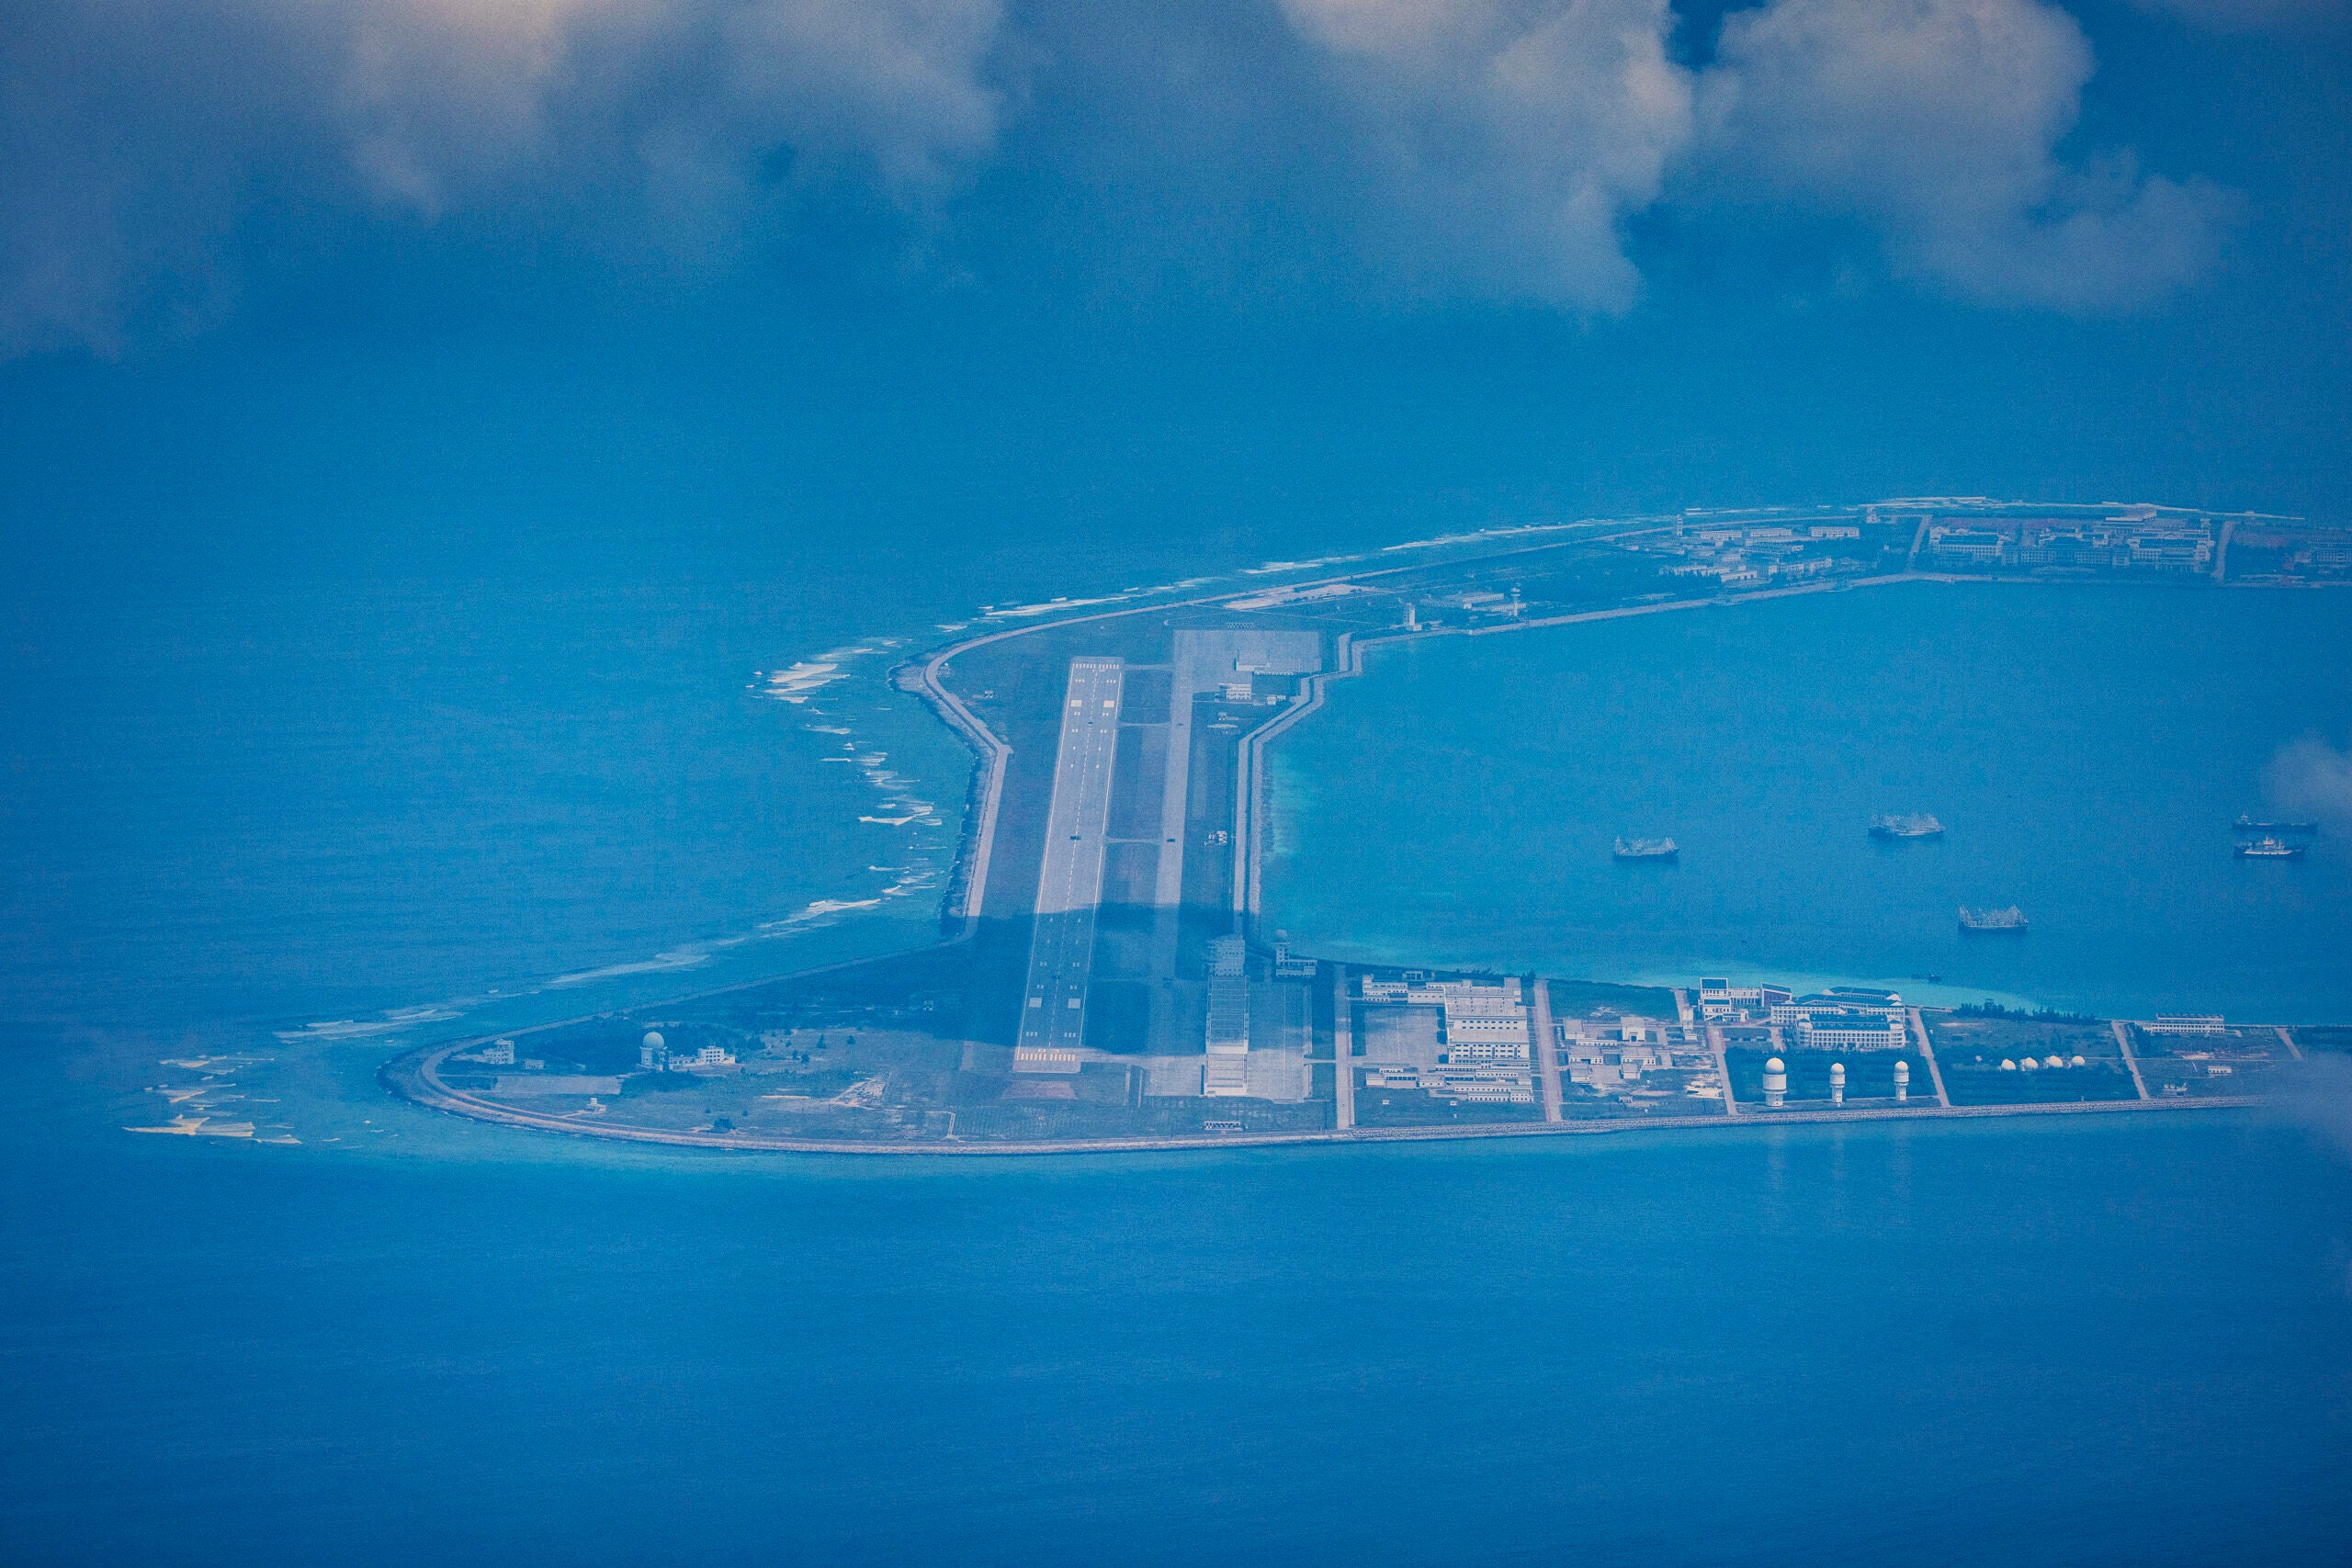 SPRATLY ISLANDS, AT SEA - OCTOBER 25: An airfield, buildings, and structures are seen on the artificial island built by China in Subi Reef on October 25, 2022 in Spratly Islands, South China Sea. China has progressively asserted its claim of ownership over disputed islands in the South China Sea by artificially increasing the size of islands, creating new islands and building ports, military outposts and airstrips. The South China sea is an important trade route and is of significant interest as geopolitical tensions remain high in the region. (Photo by Ezra Acayan/Getty Images)